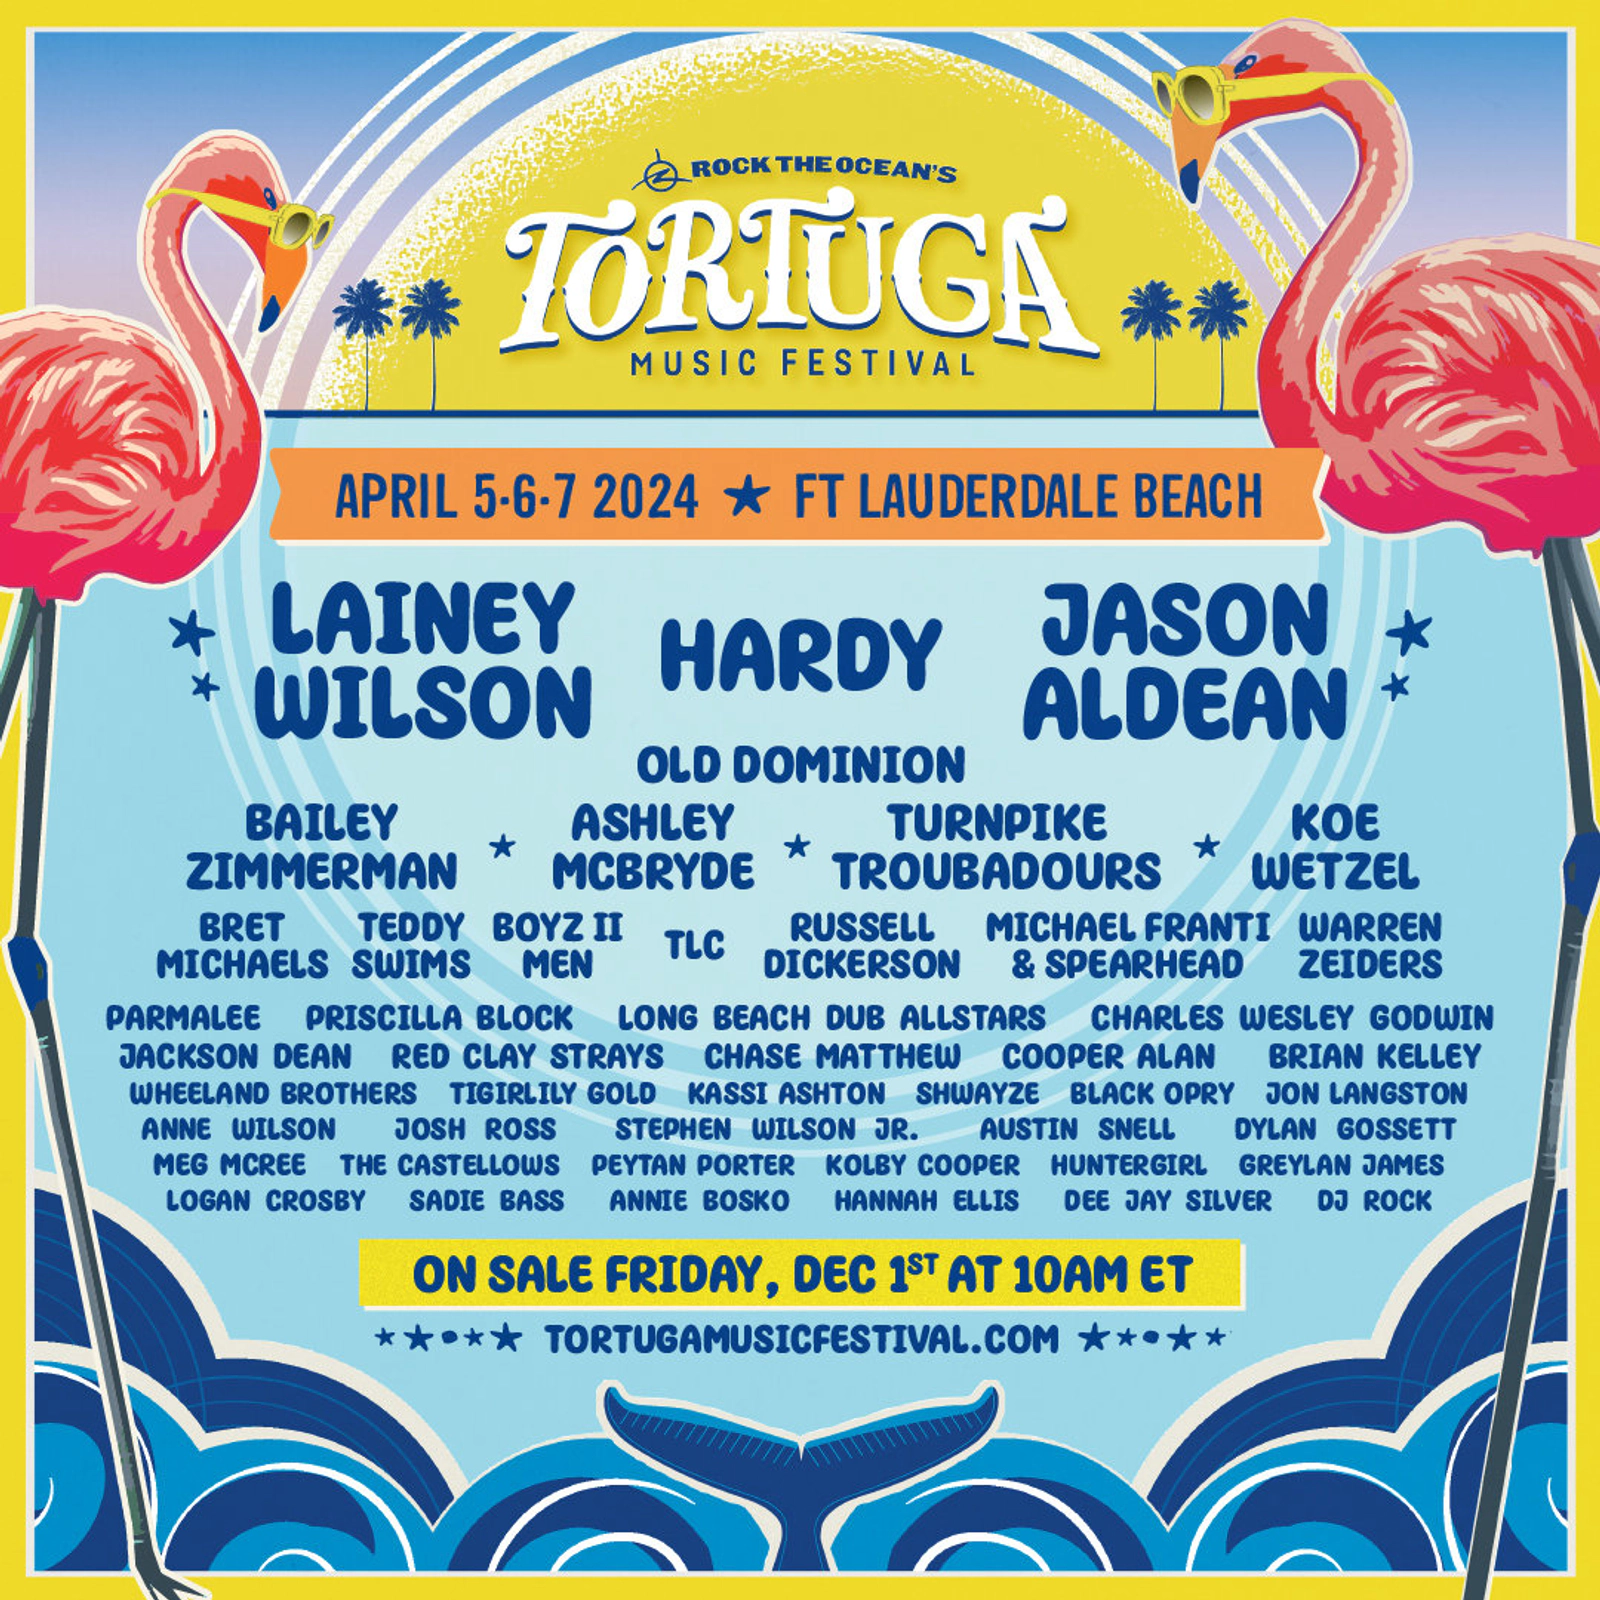 Win YOUR tickets to Tortuga 2024 92.1 CTQ 92.1 CTQ